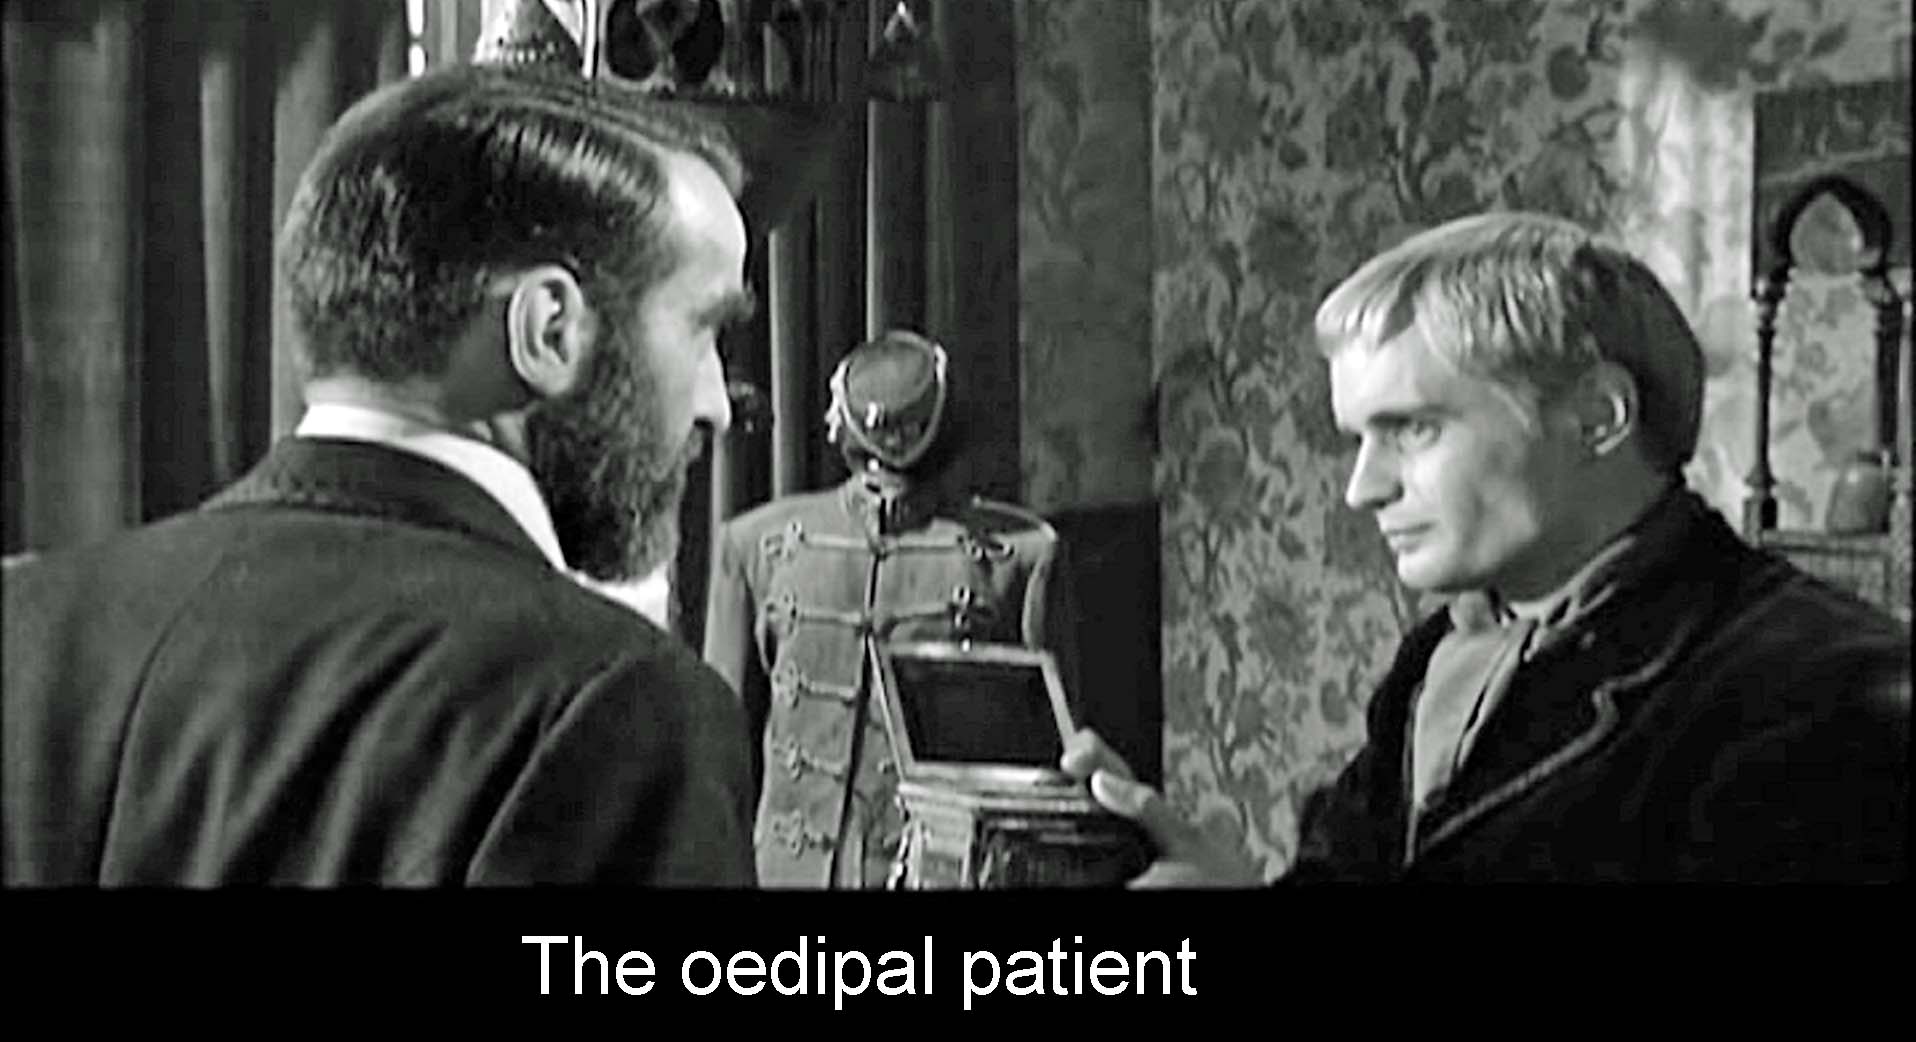 The oedipal patient